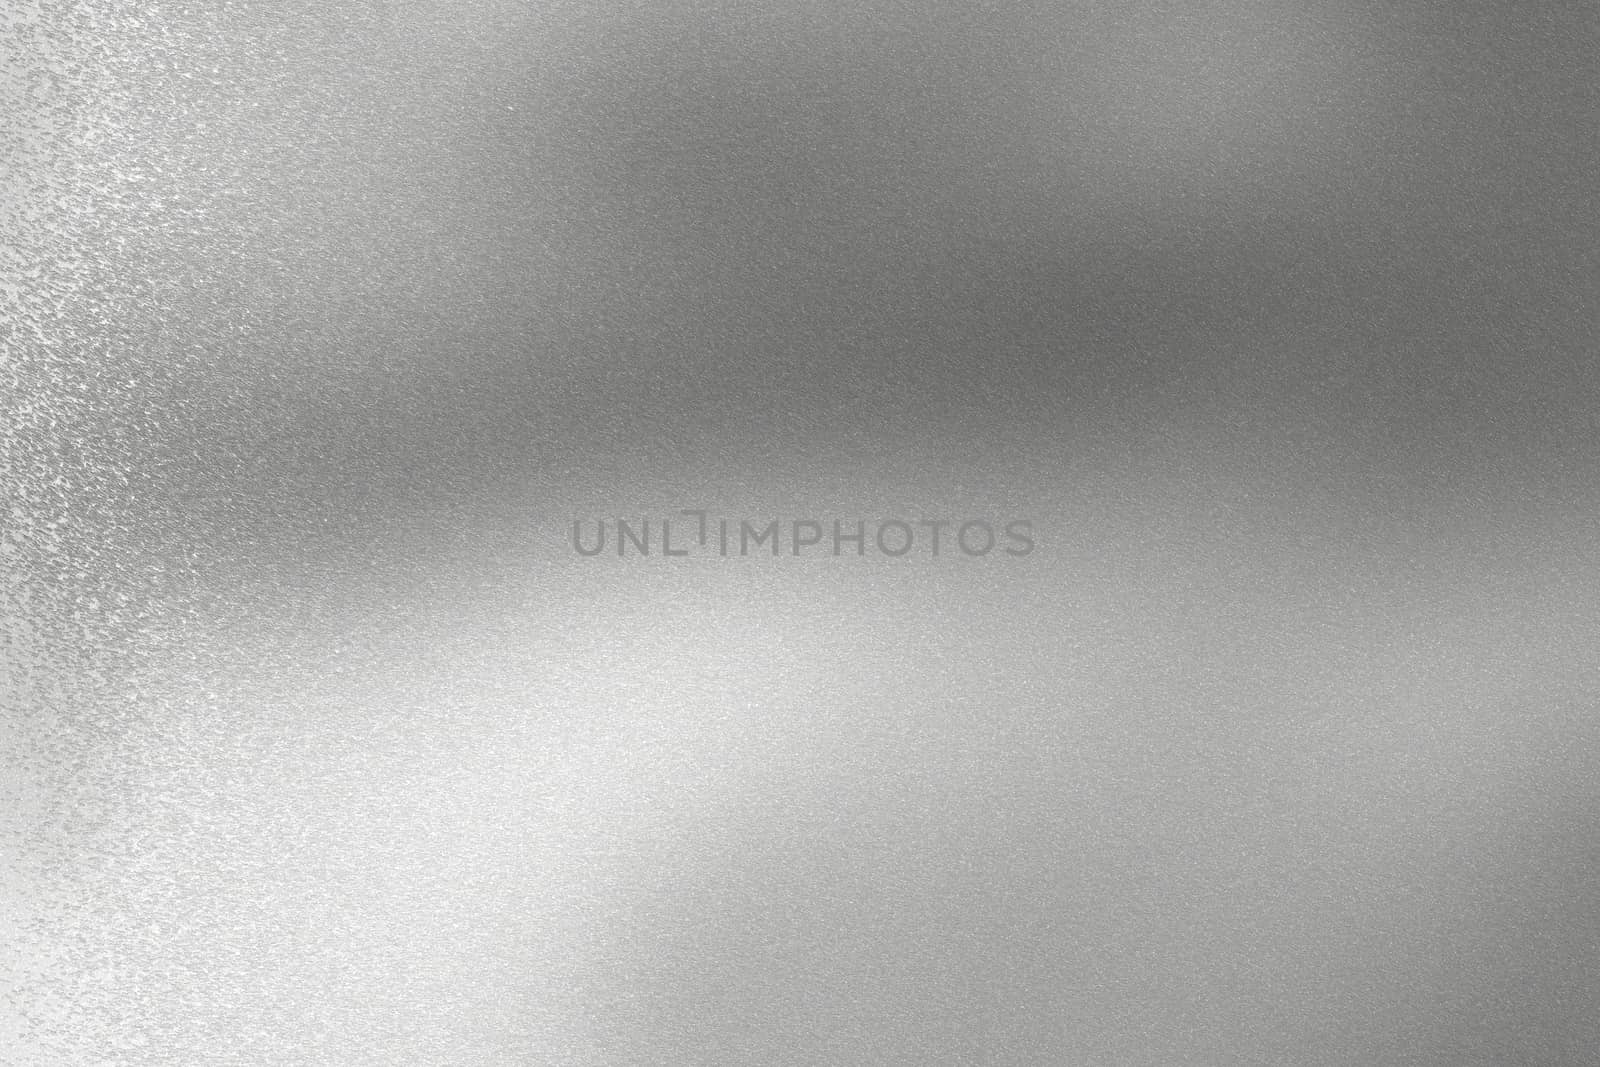 Shiny brushed silver metal sheet, abstract texture background